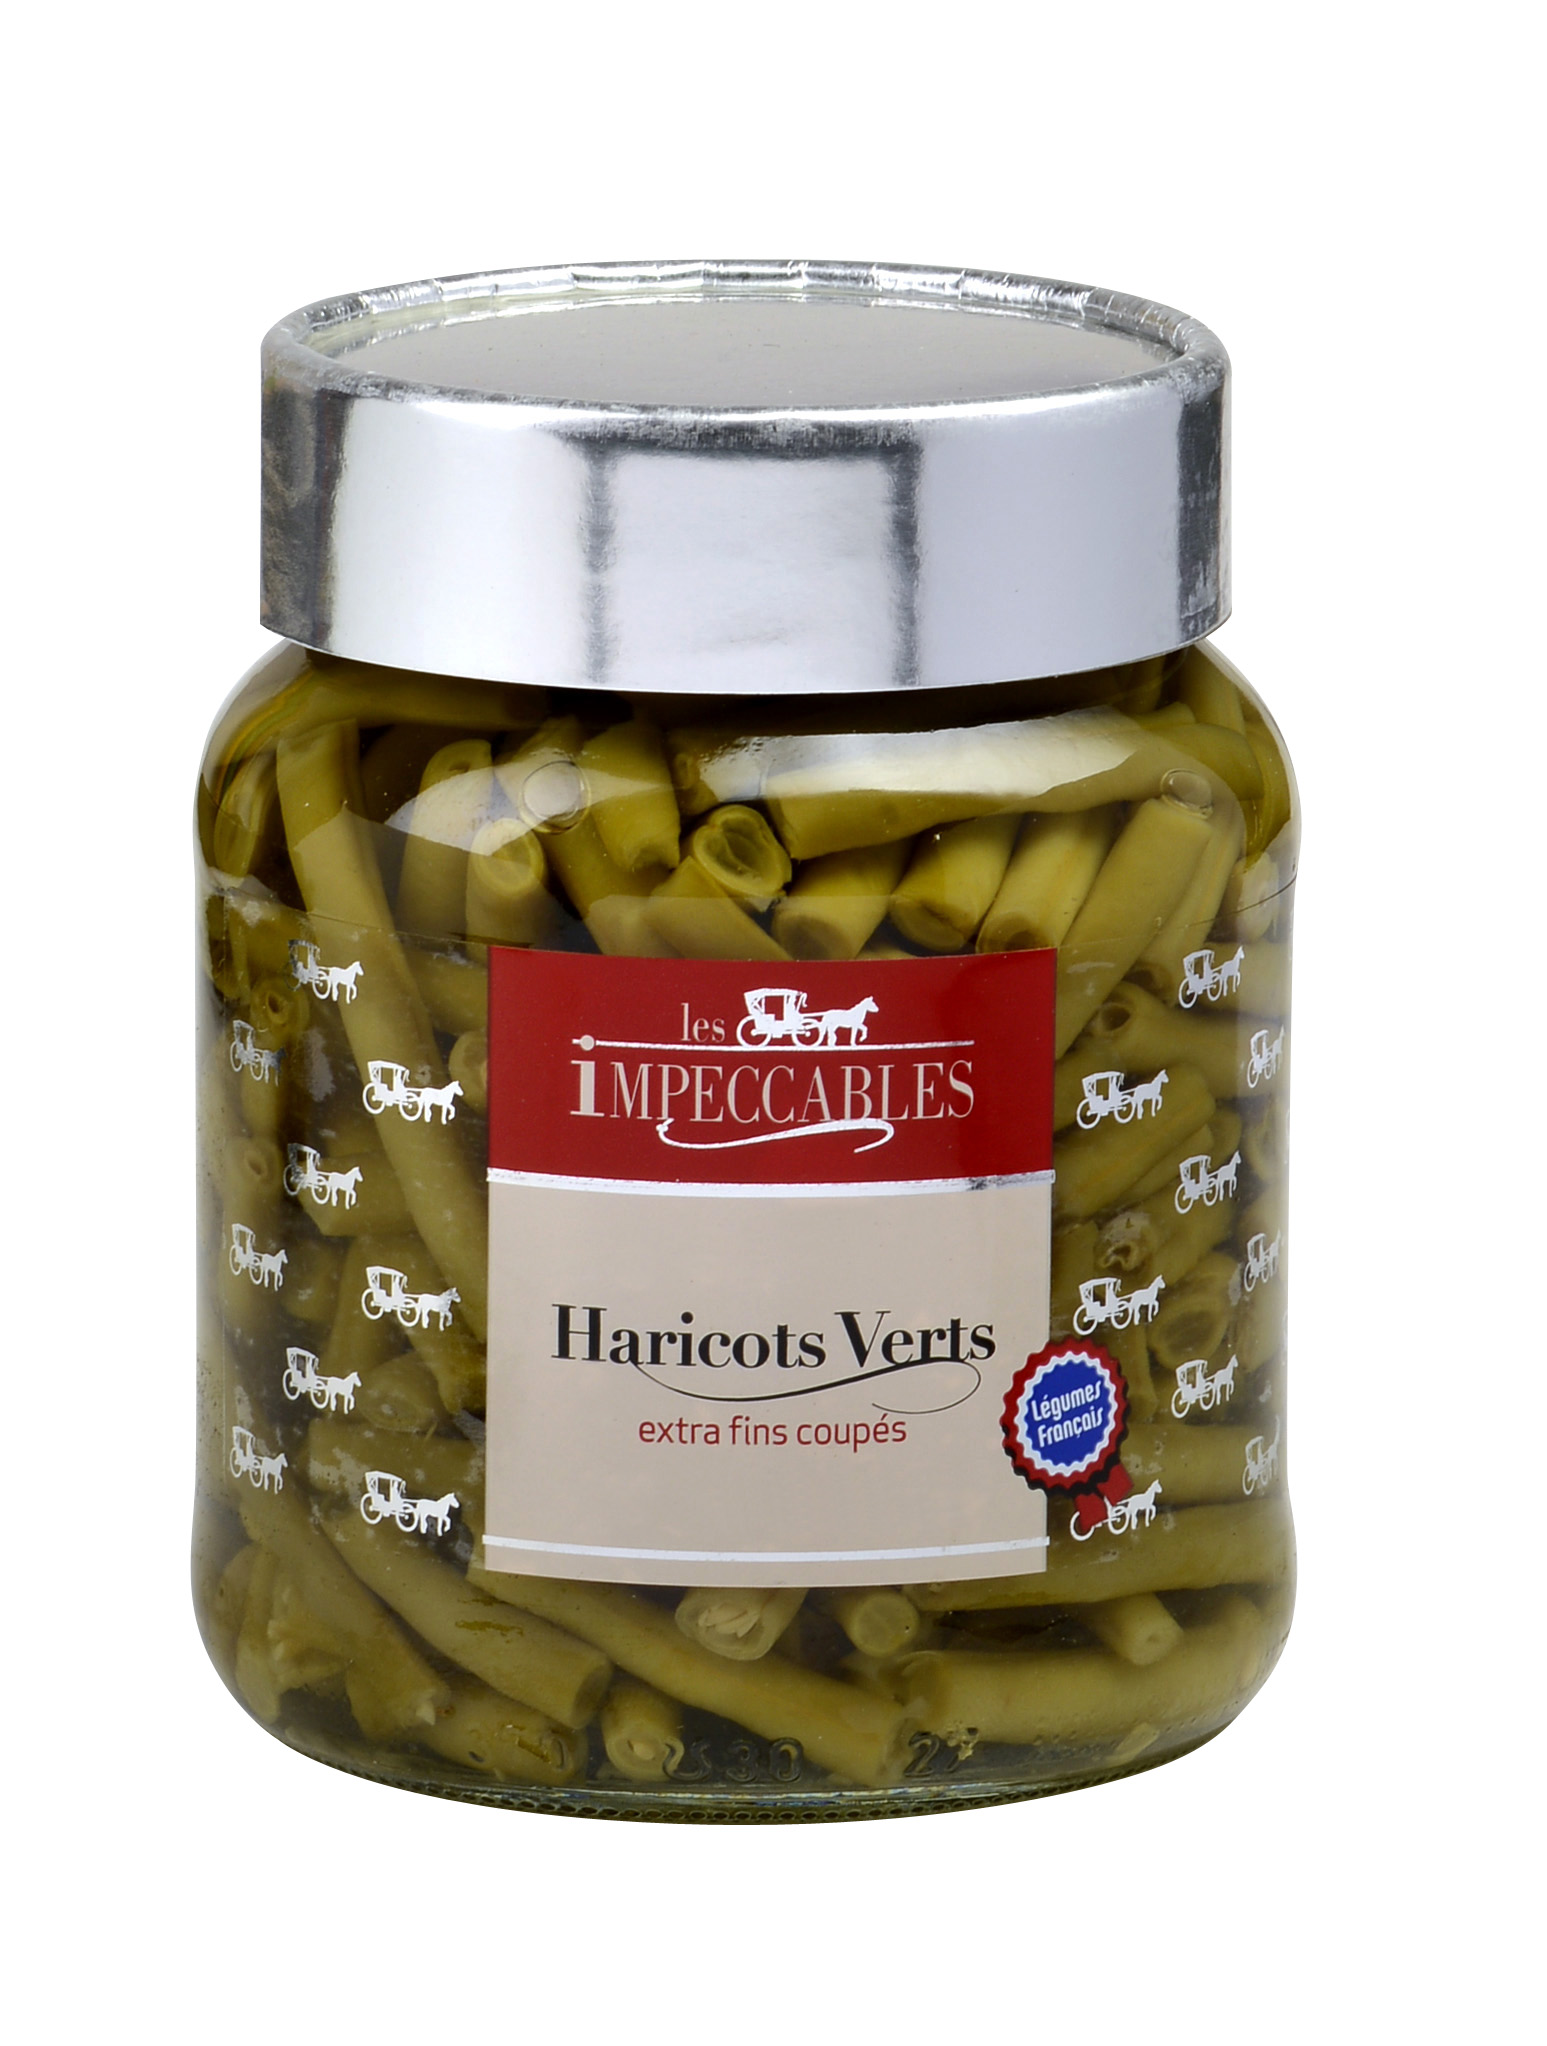 HARICOTS VERTS EXTRA FINS